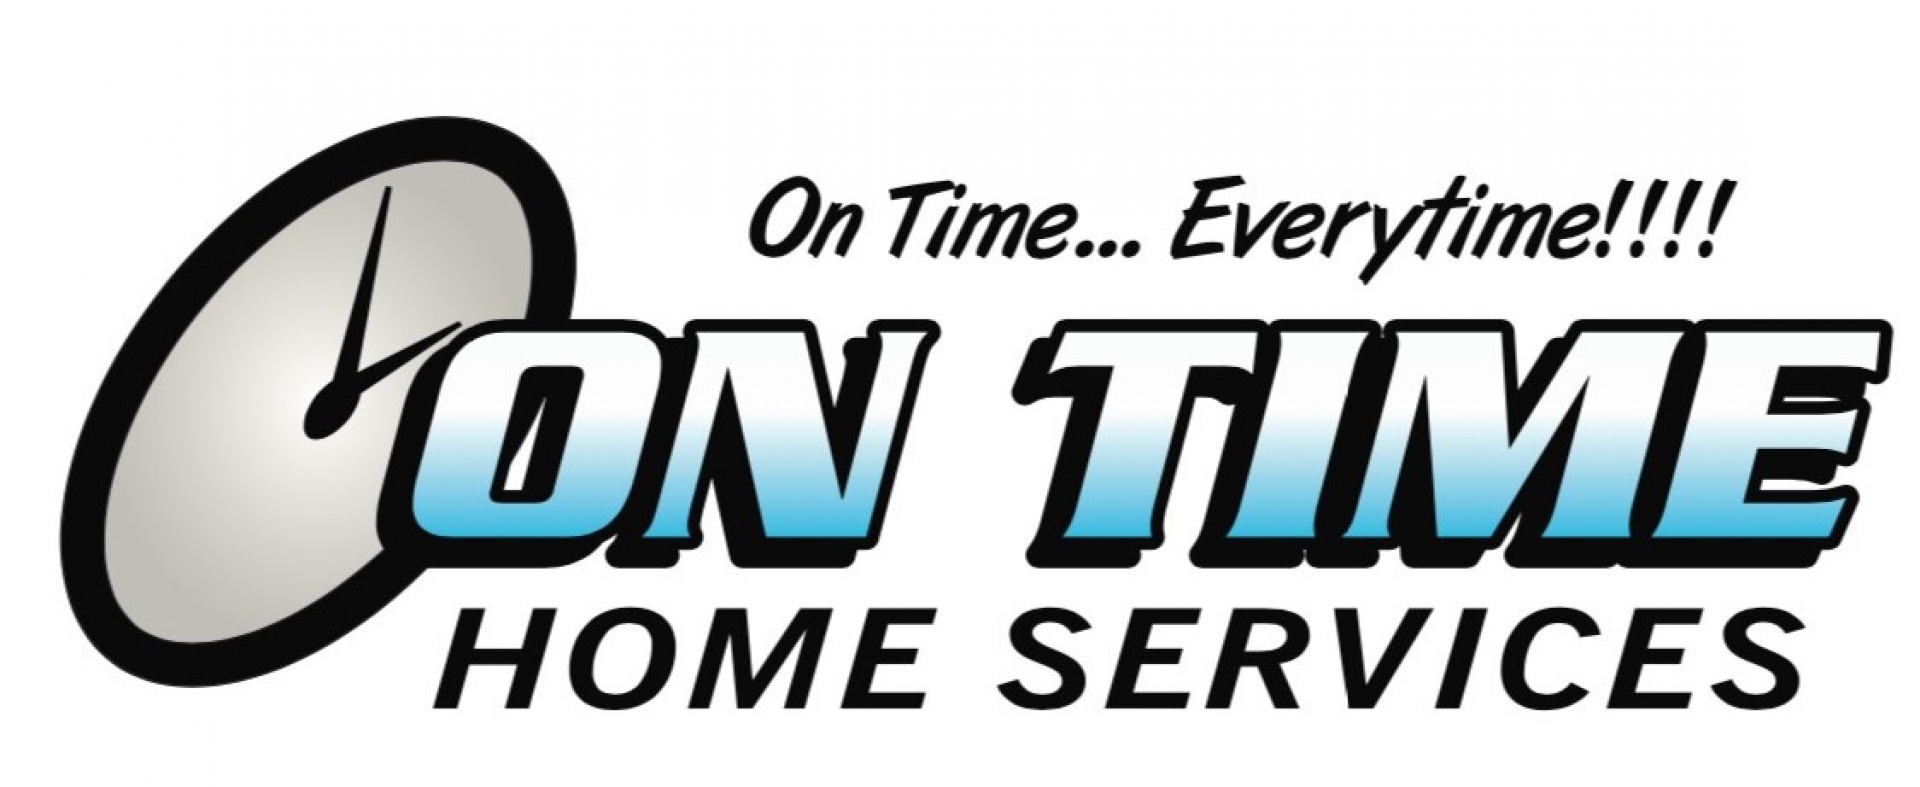 On Time Home Services, Inc. company logo